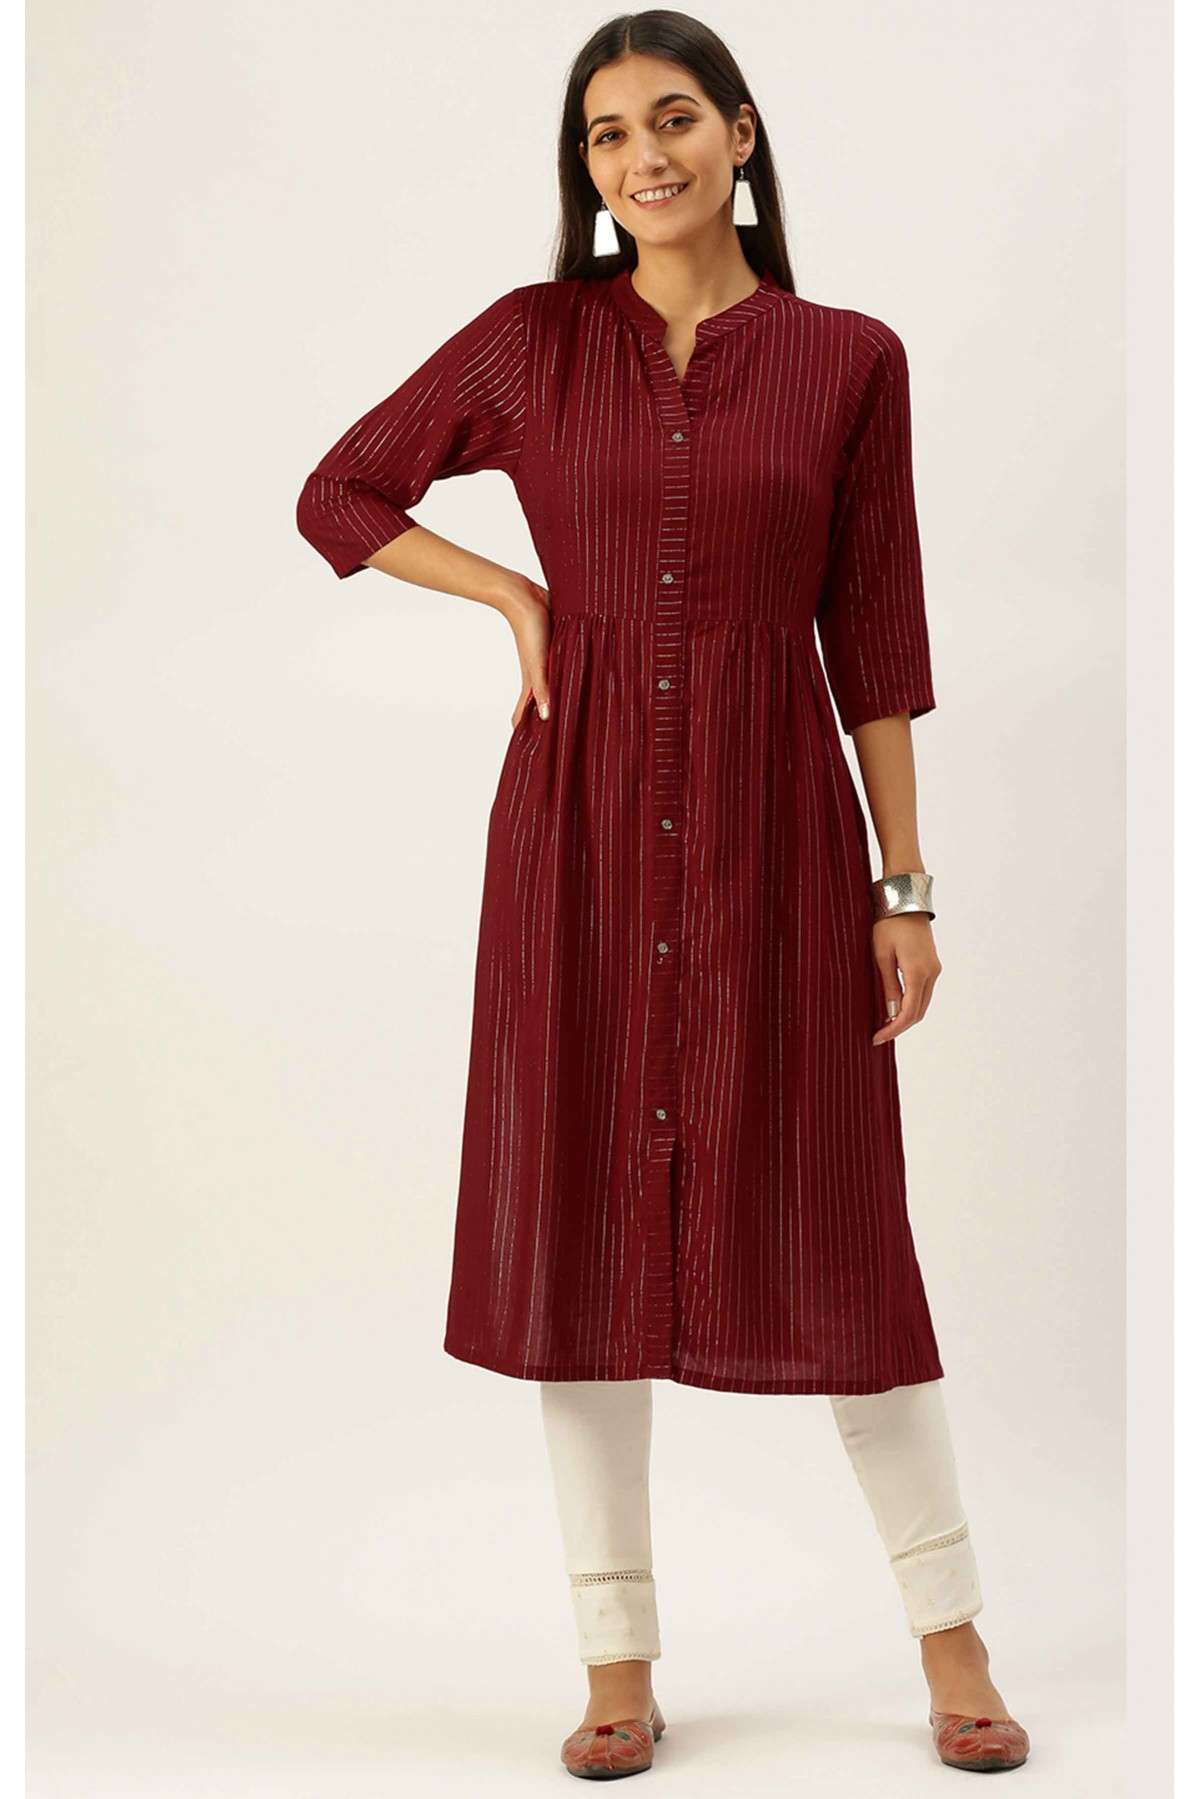 Rayon Party Wear Kurti In Red Colour - KR5480617